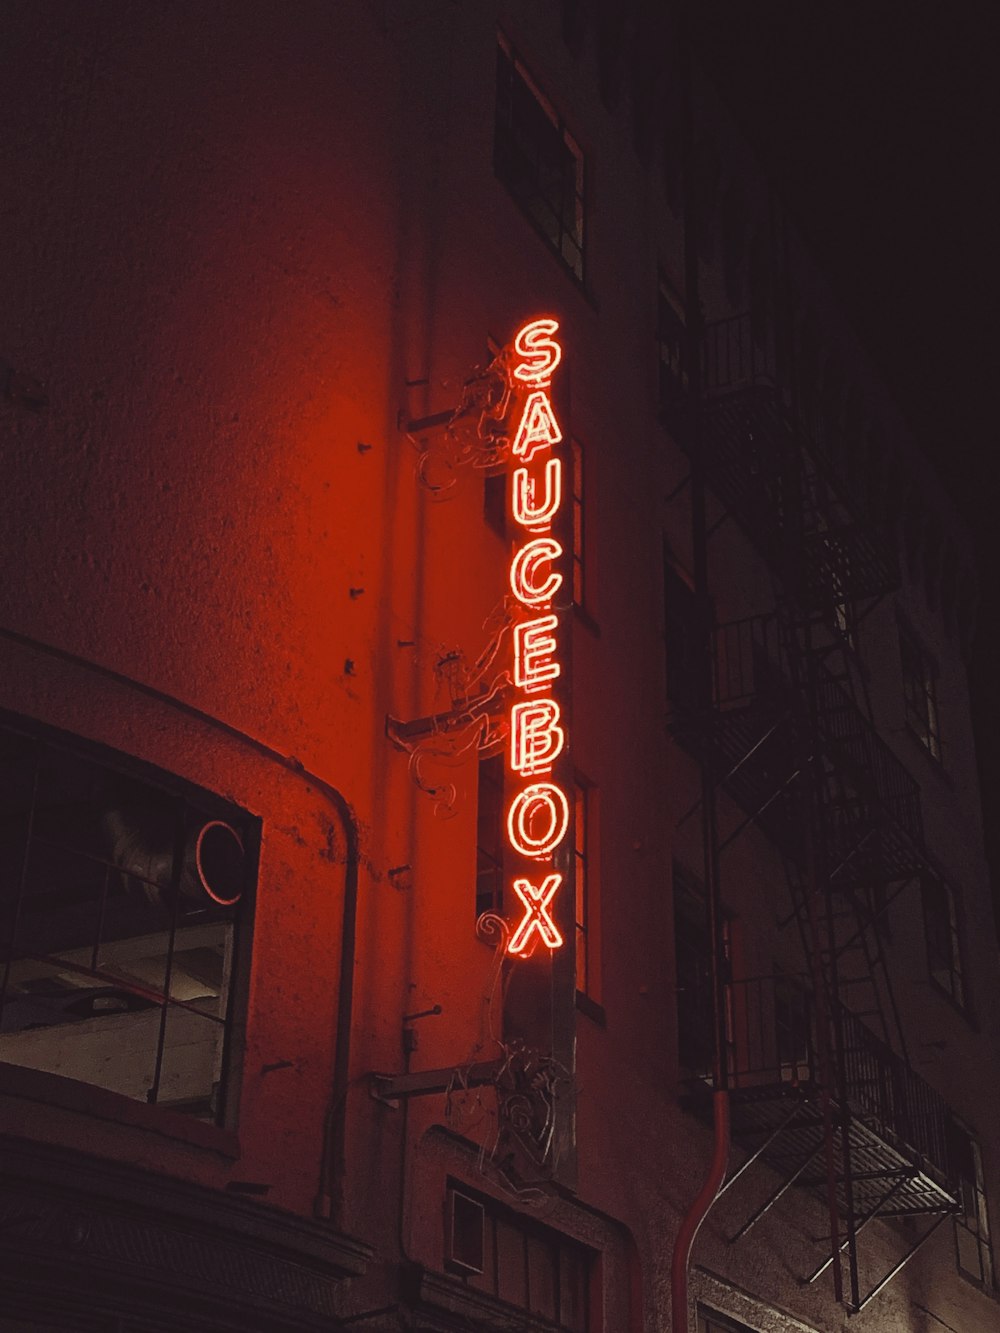 saucebox lighted signage during nighttime